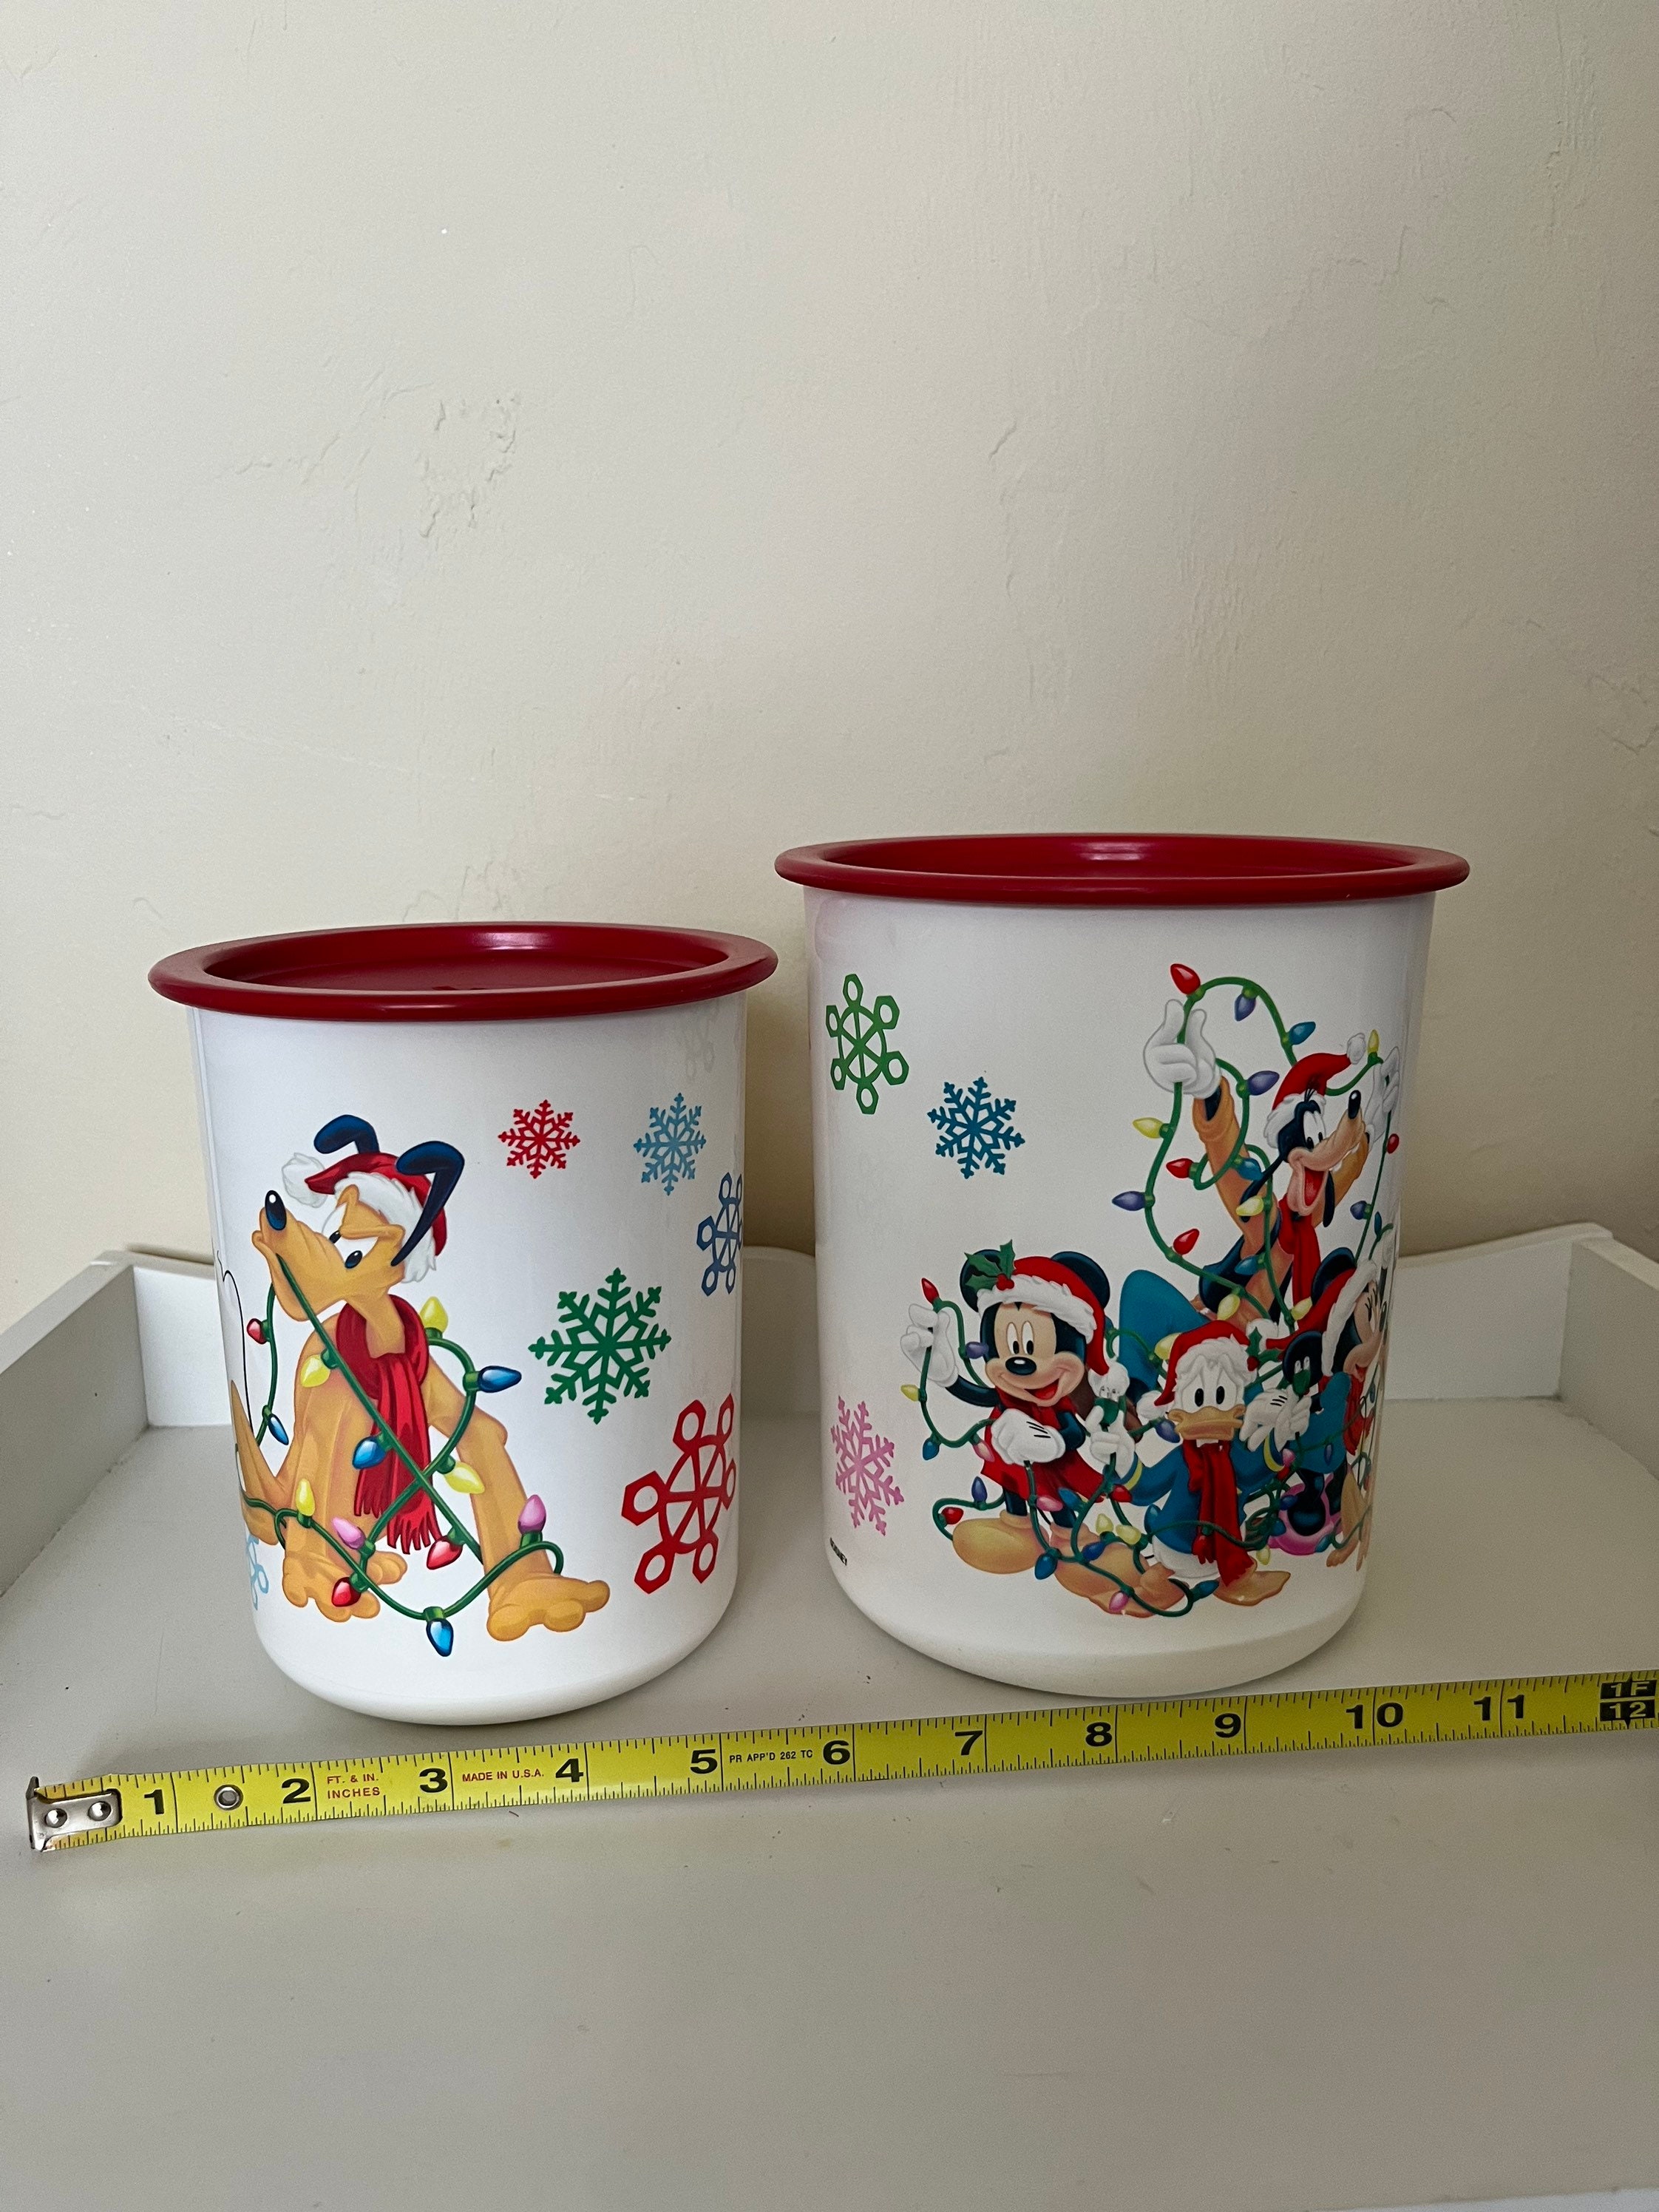 Set of 4 Tupperware Disney Canisters Mickey Mouse Minnie Goofy Donald Duck